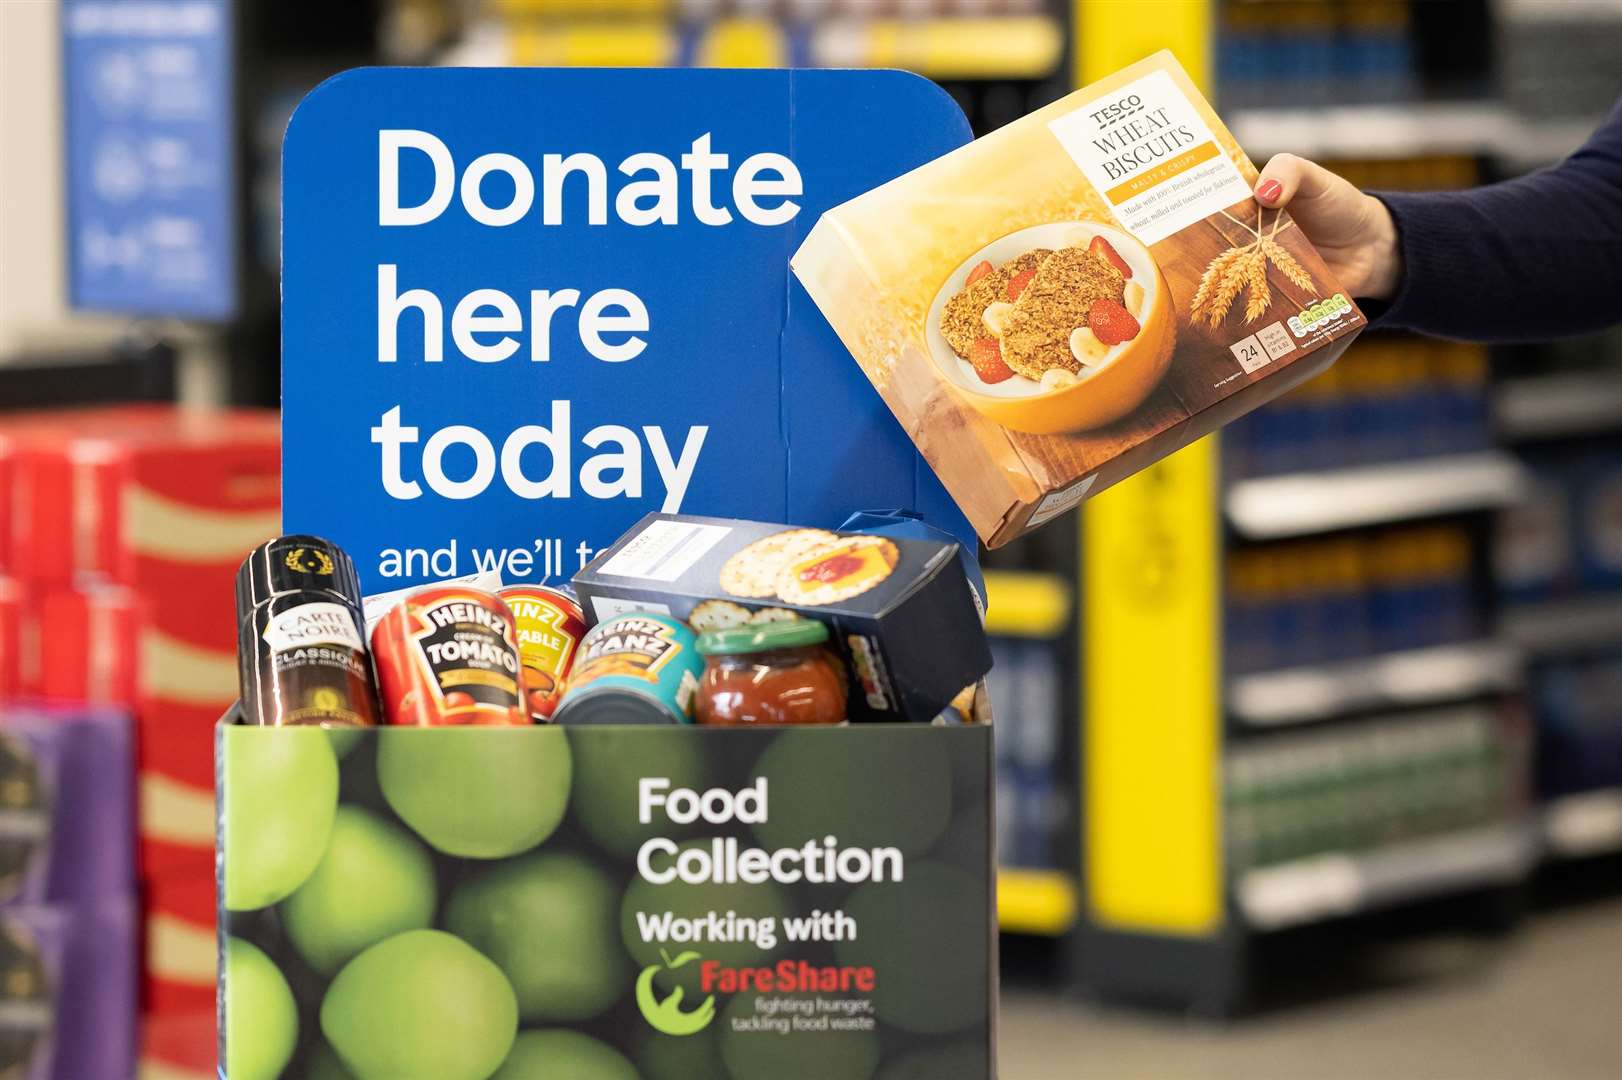 Food collection at Tesco.